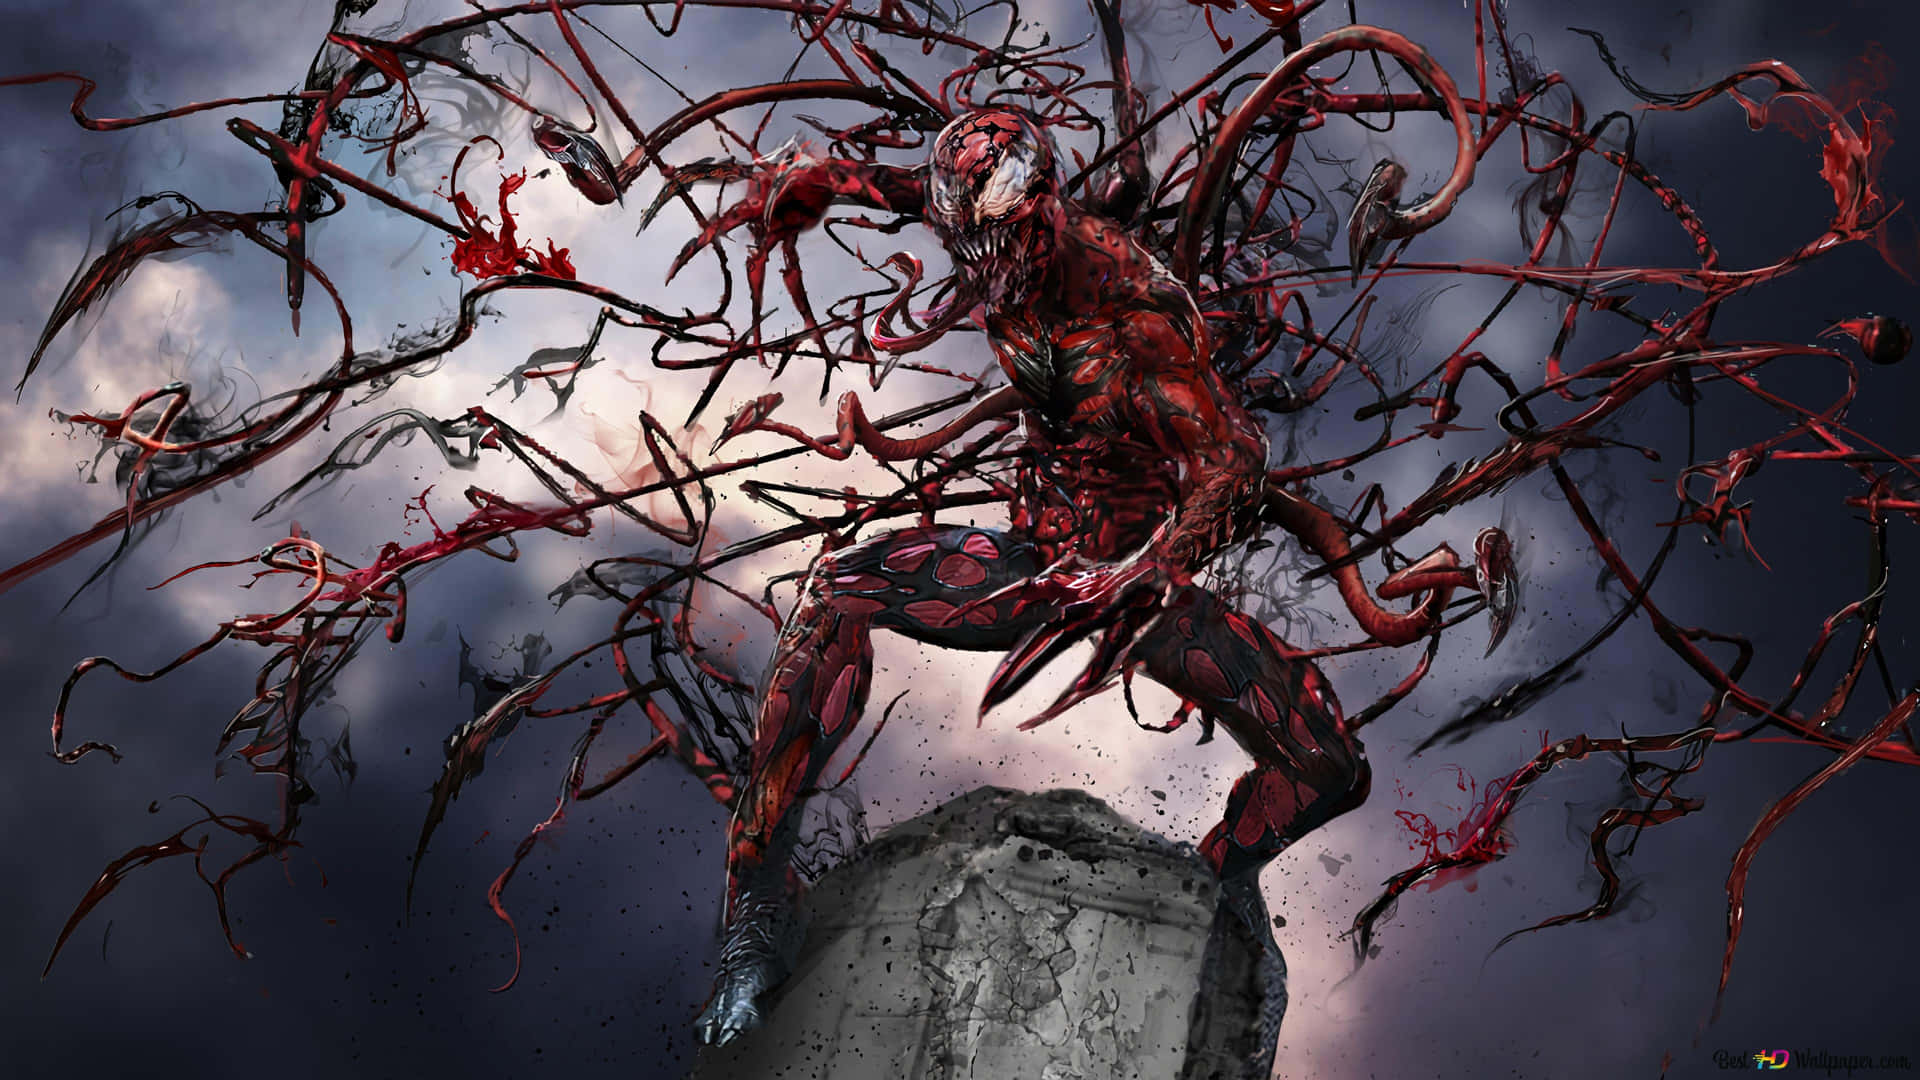 Carnage, the macabre Marvel supervillain in a menacing stance. Wallpaper